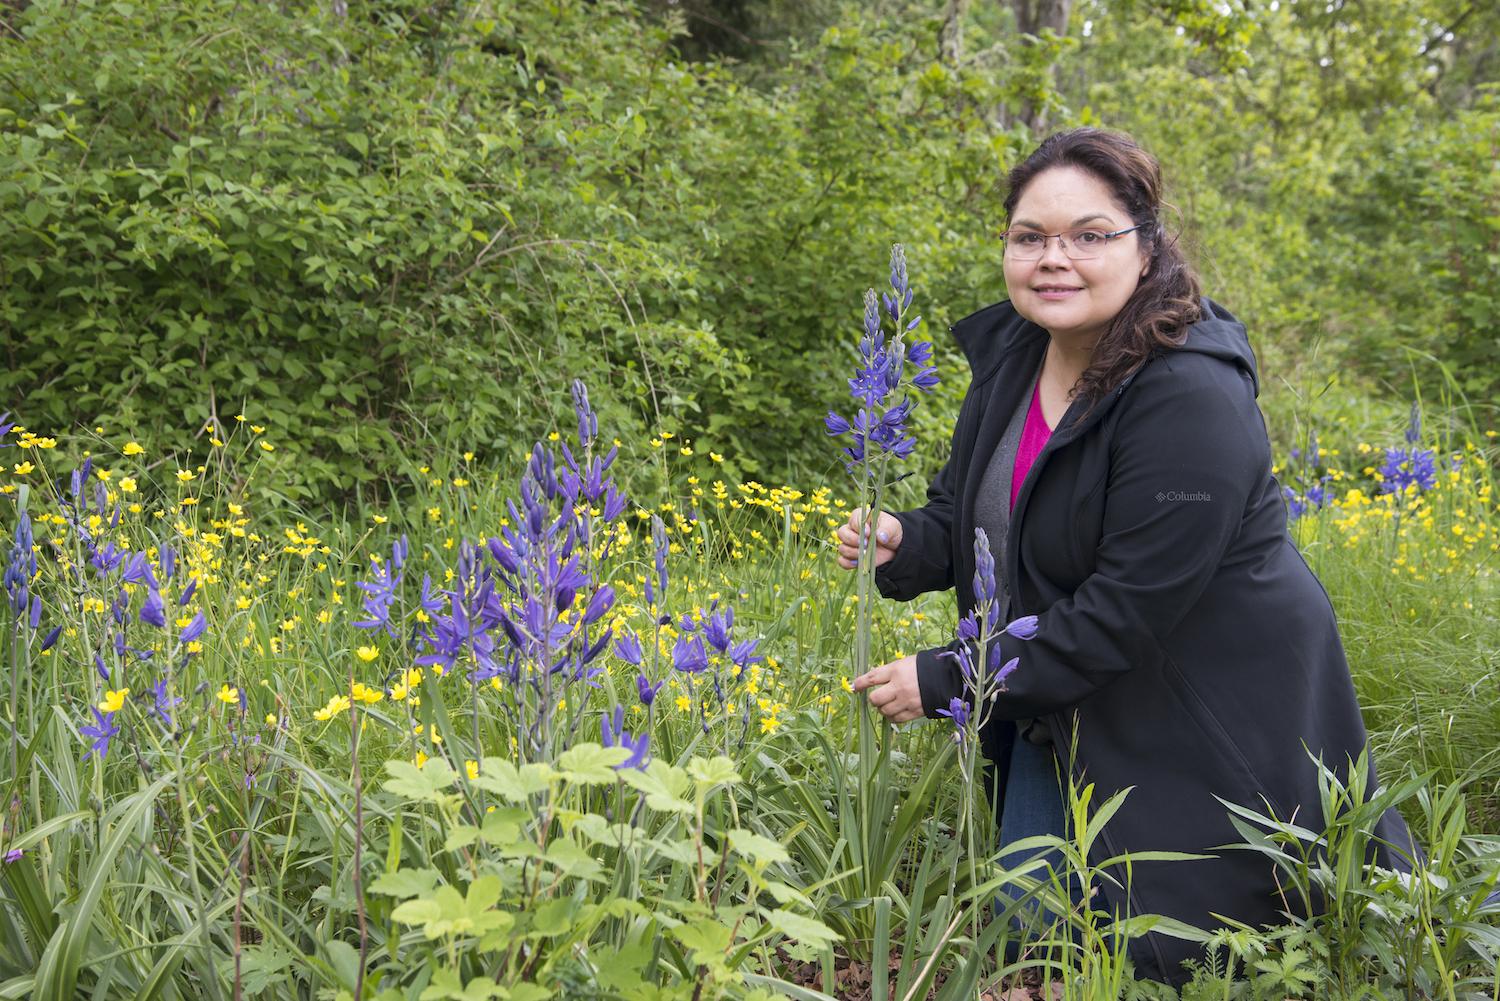 Songhees Nation Knowledge Holder Cheryl Bryce shows off culturally significant camas in the Garry Oak Learning Meadow.